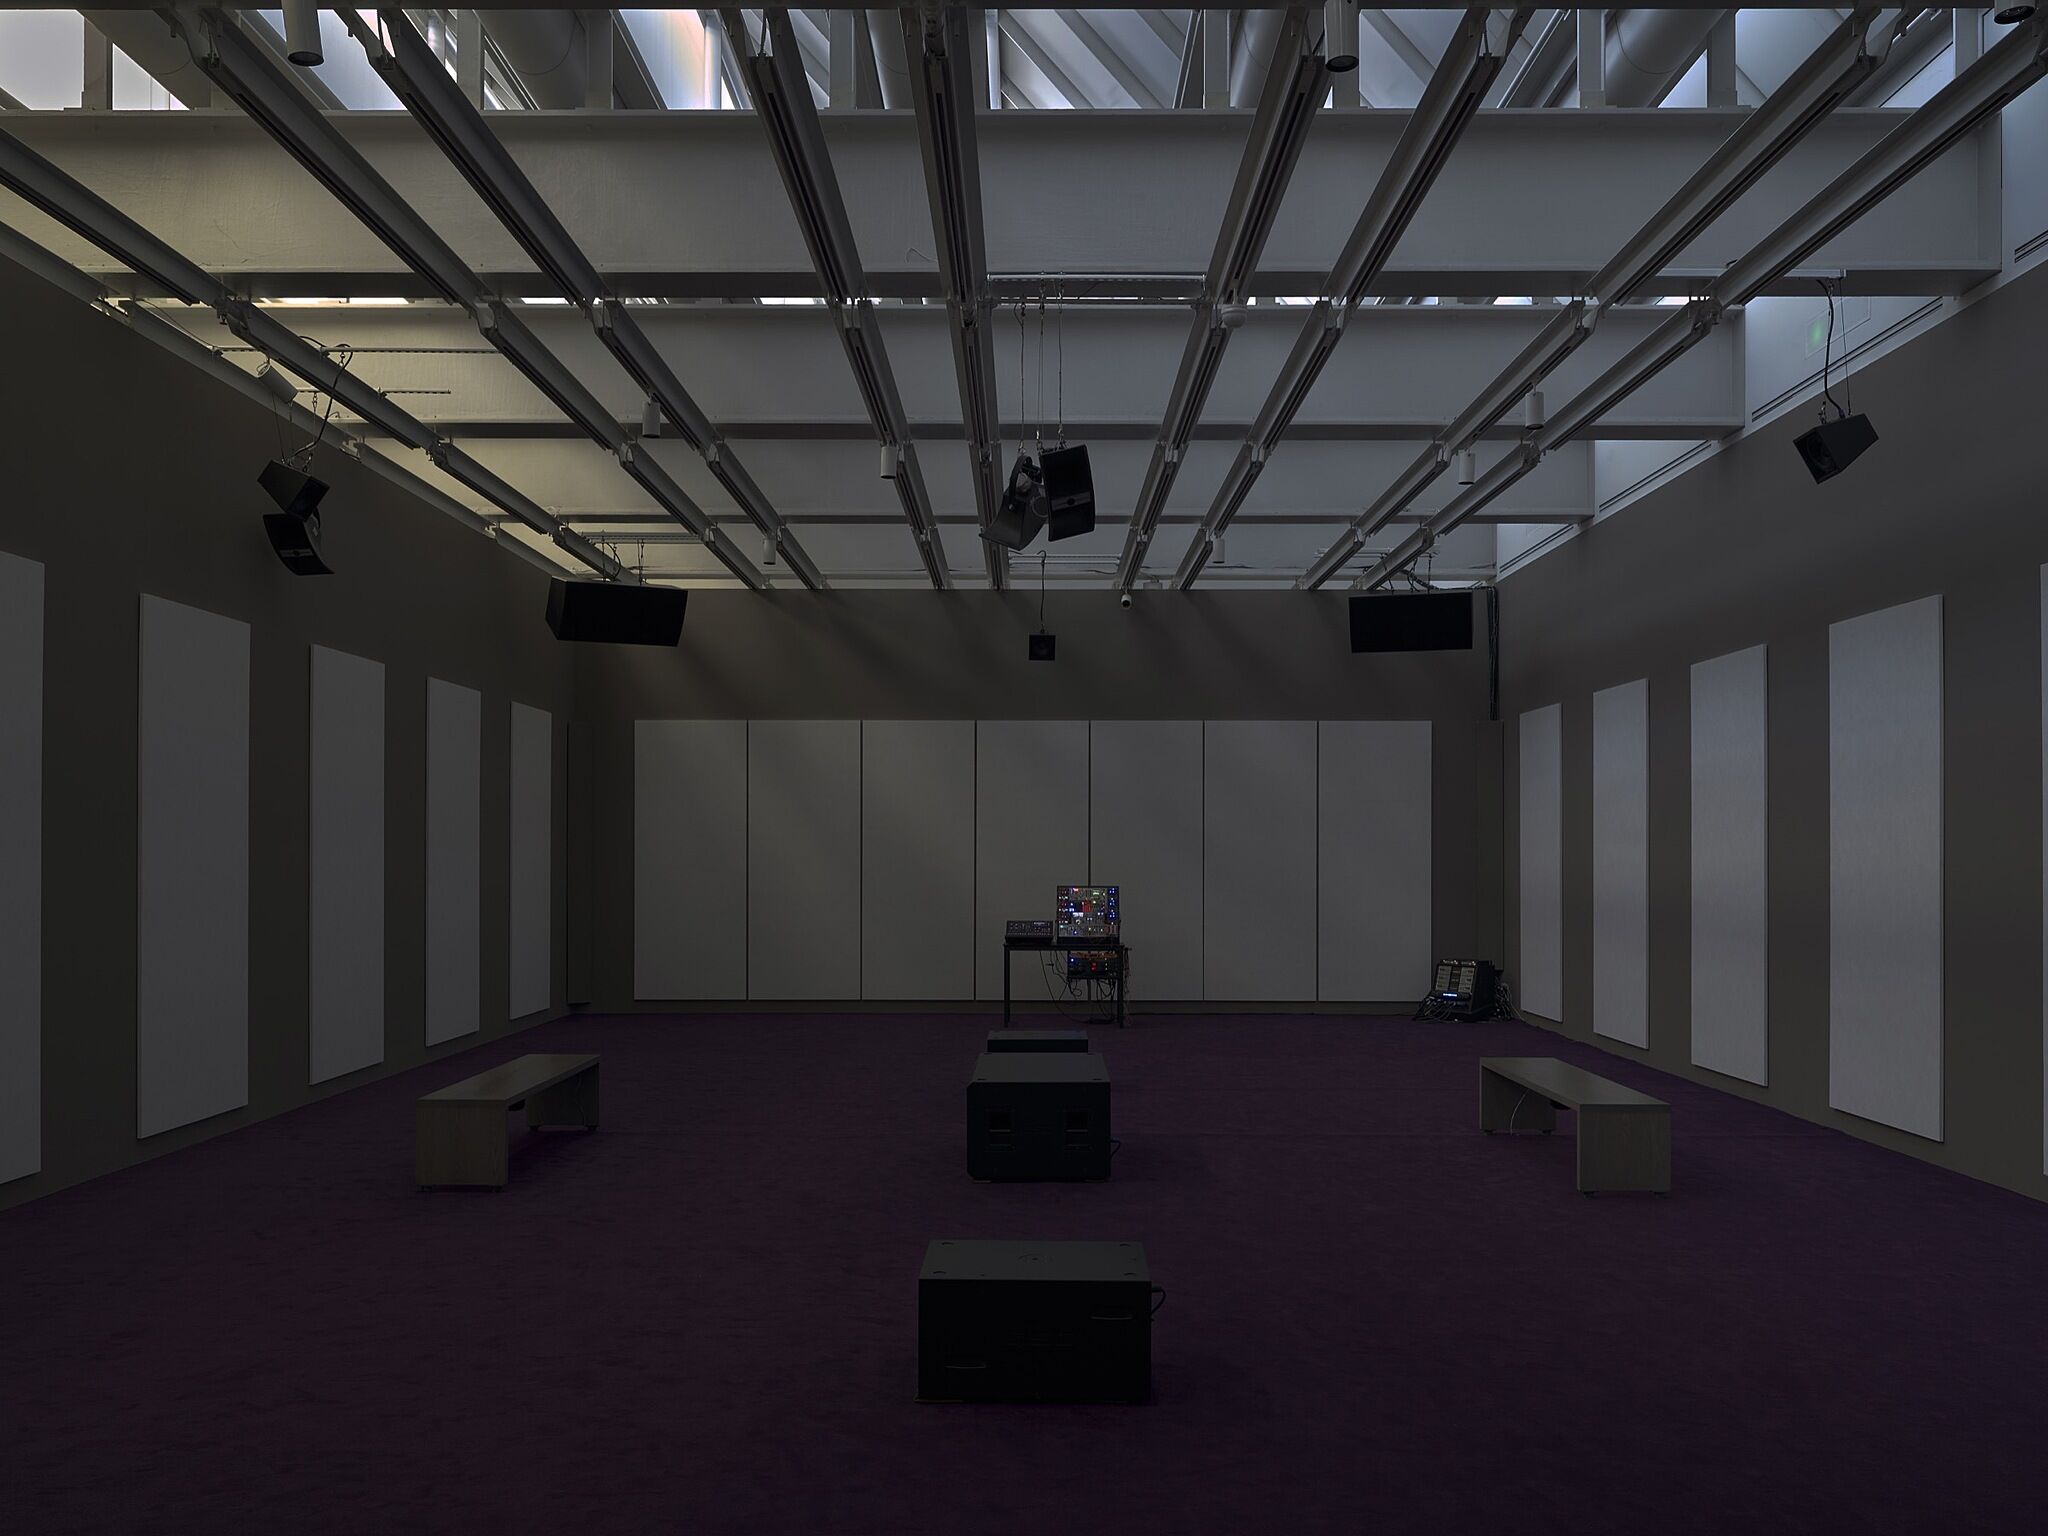 A dimly lit gallery space with speakers.